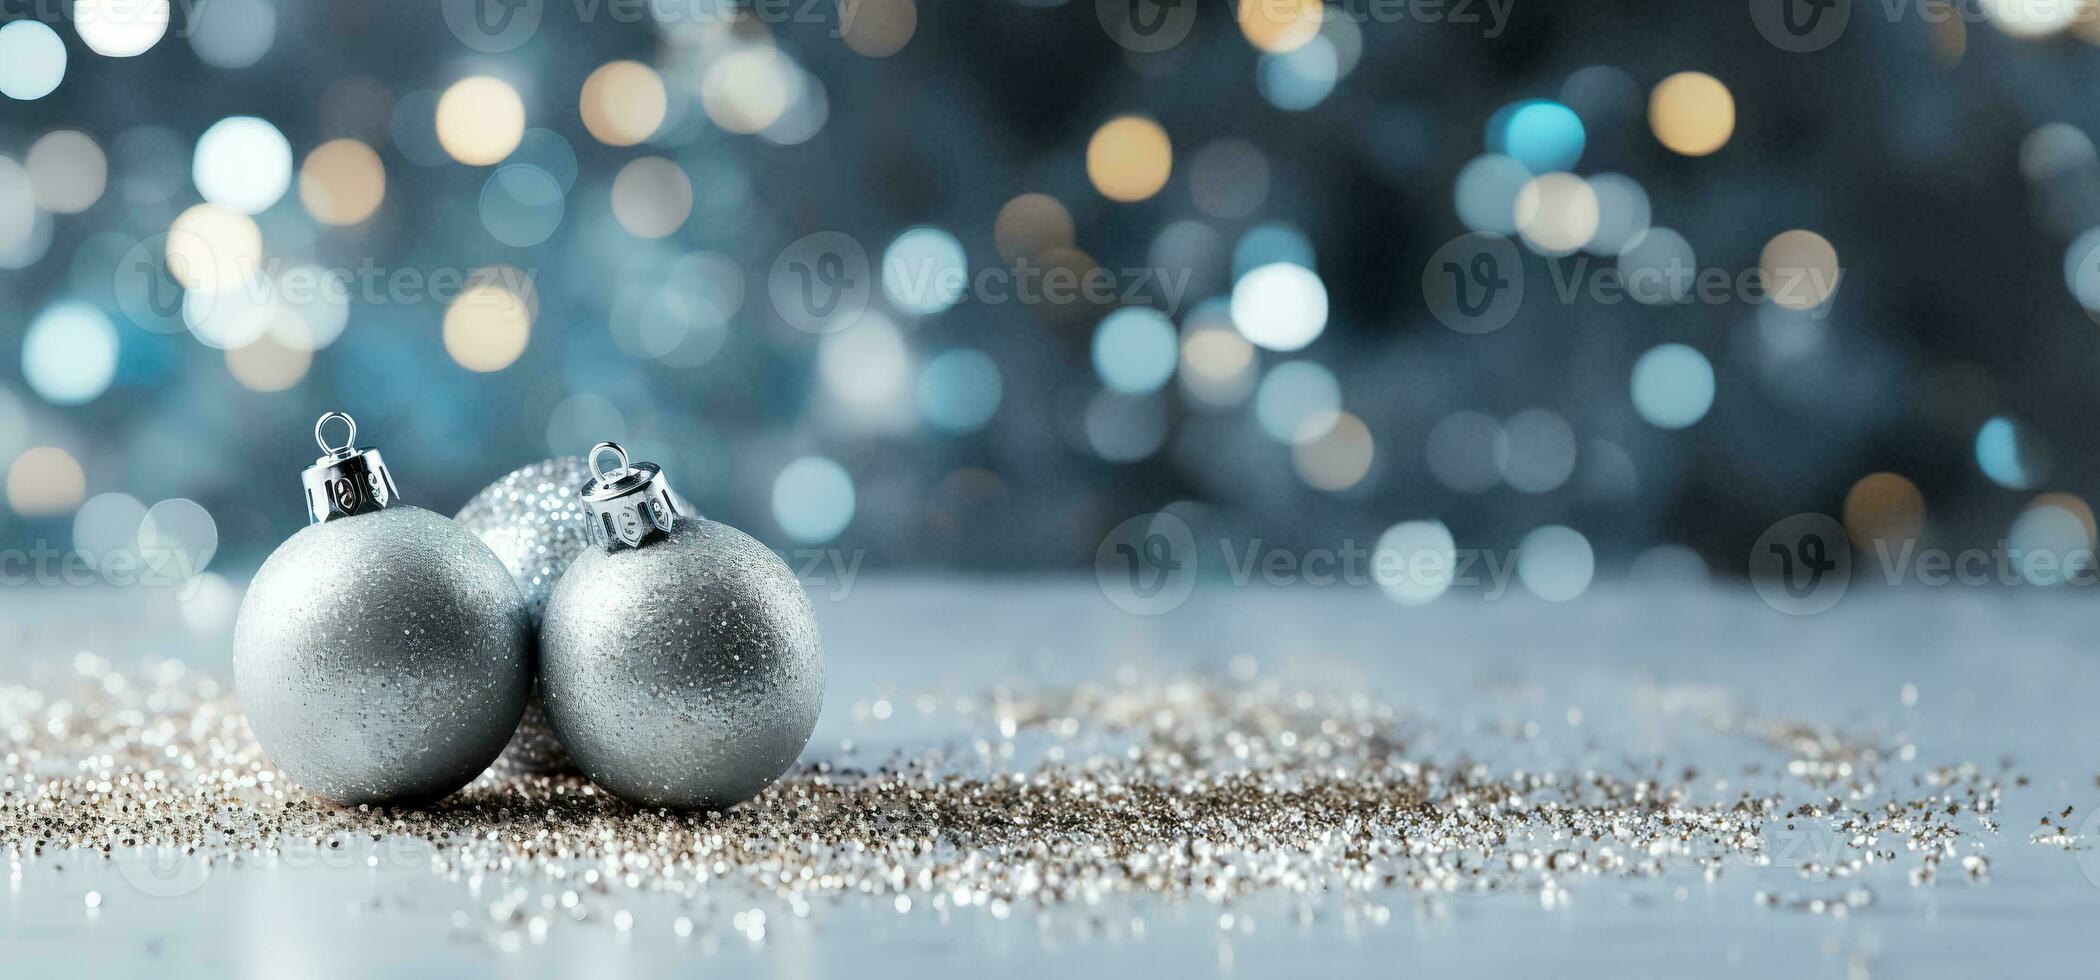 Festive silver Christmas ornaments arranged on sparkly backgrounds providing an elegant background with empty space for text photo